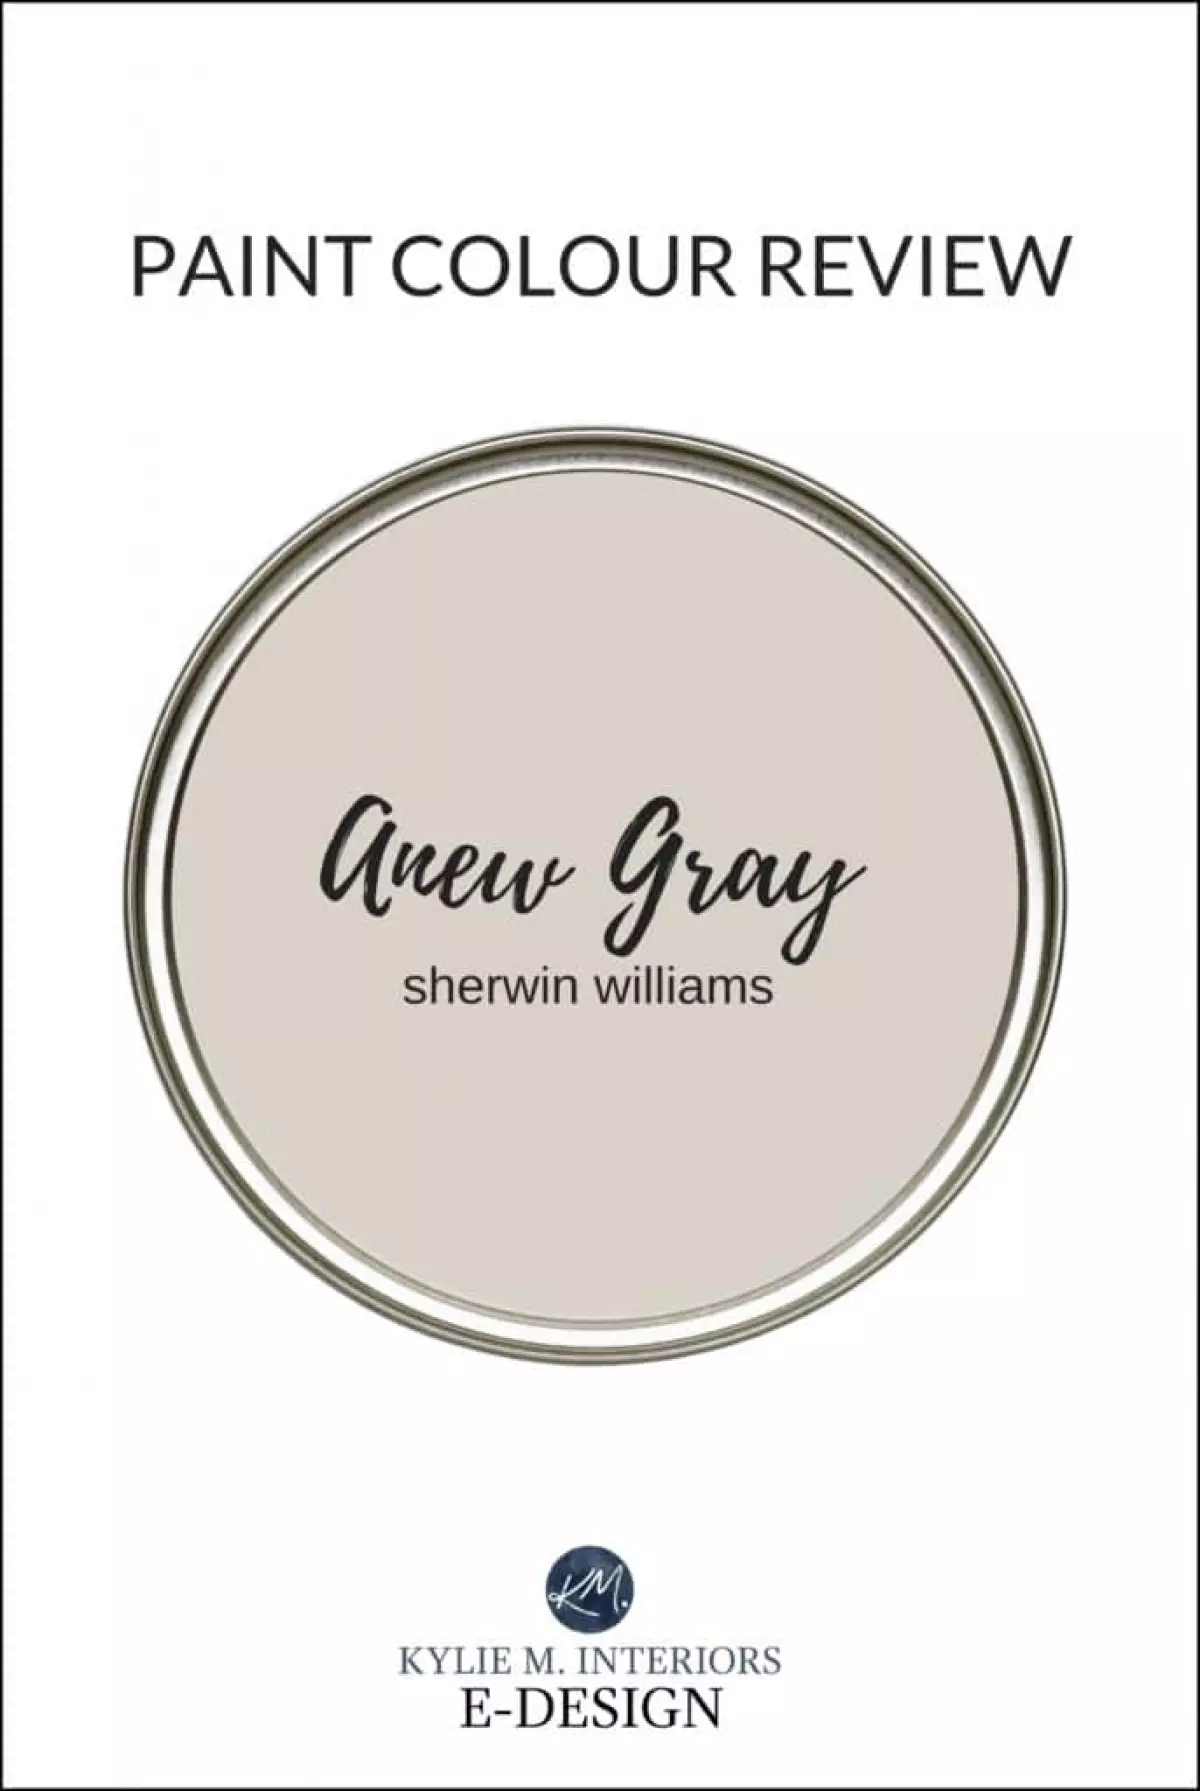 Paint color review of Sherwin Williams Anew Gray